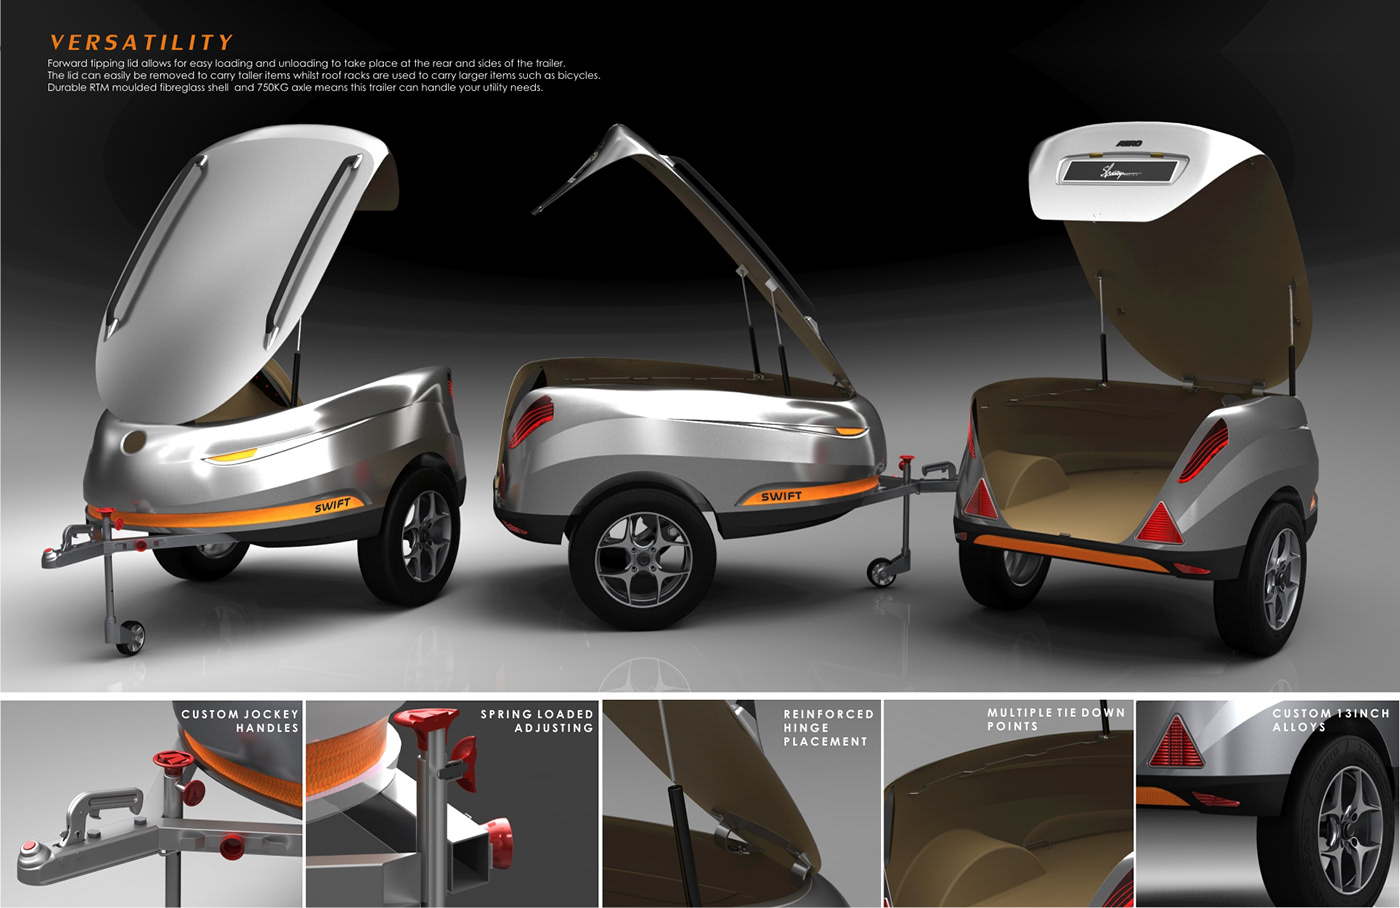 trailer luggage car small car small Efficient Sustainable green utility stylish automotive   light weight compact